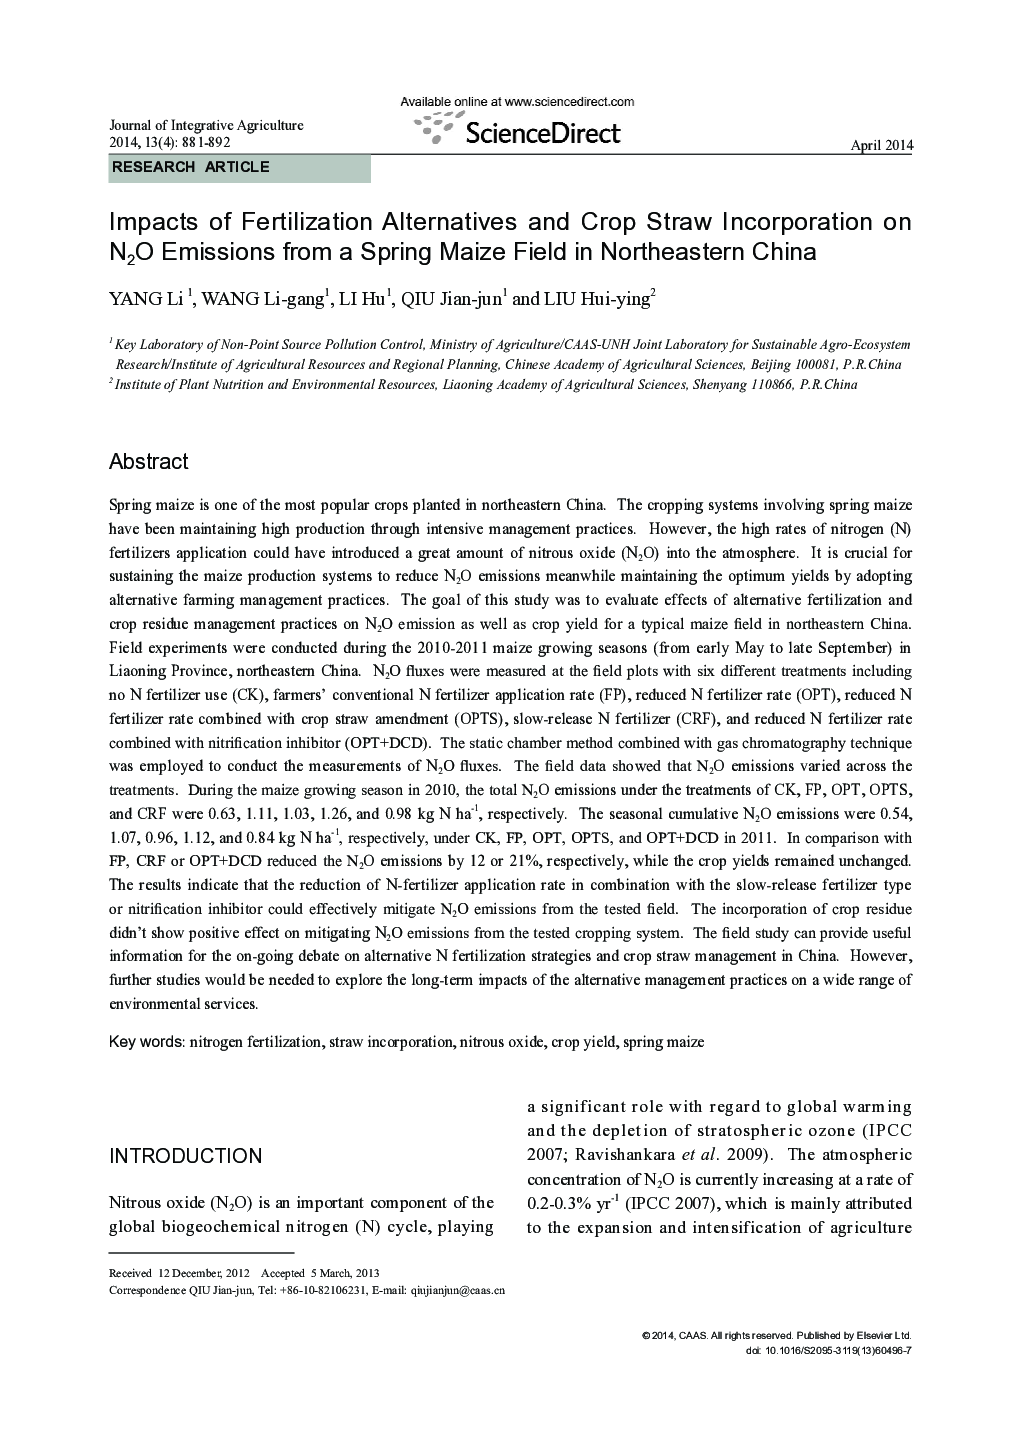 Impacts of Fertilization Alternatives and Crop Straw Incorporation on N2O Emissions from a Spring Maize Field in Northeastern China